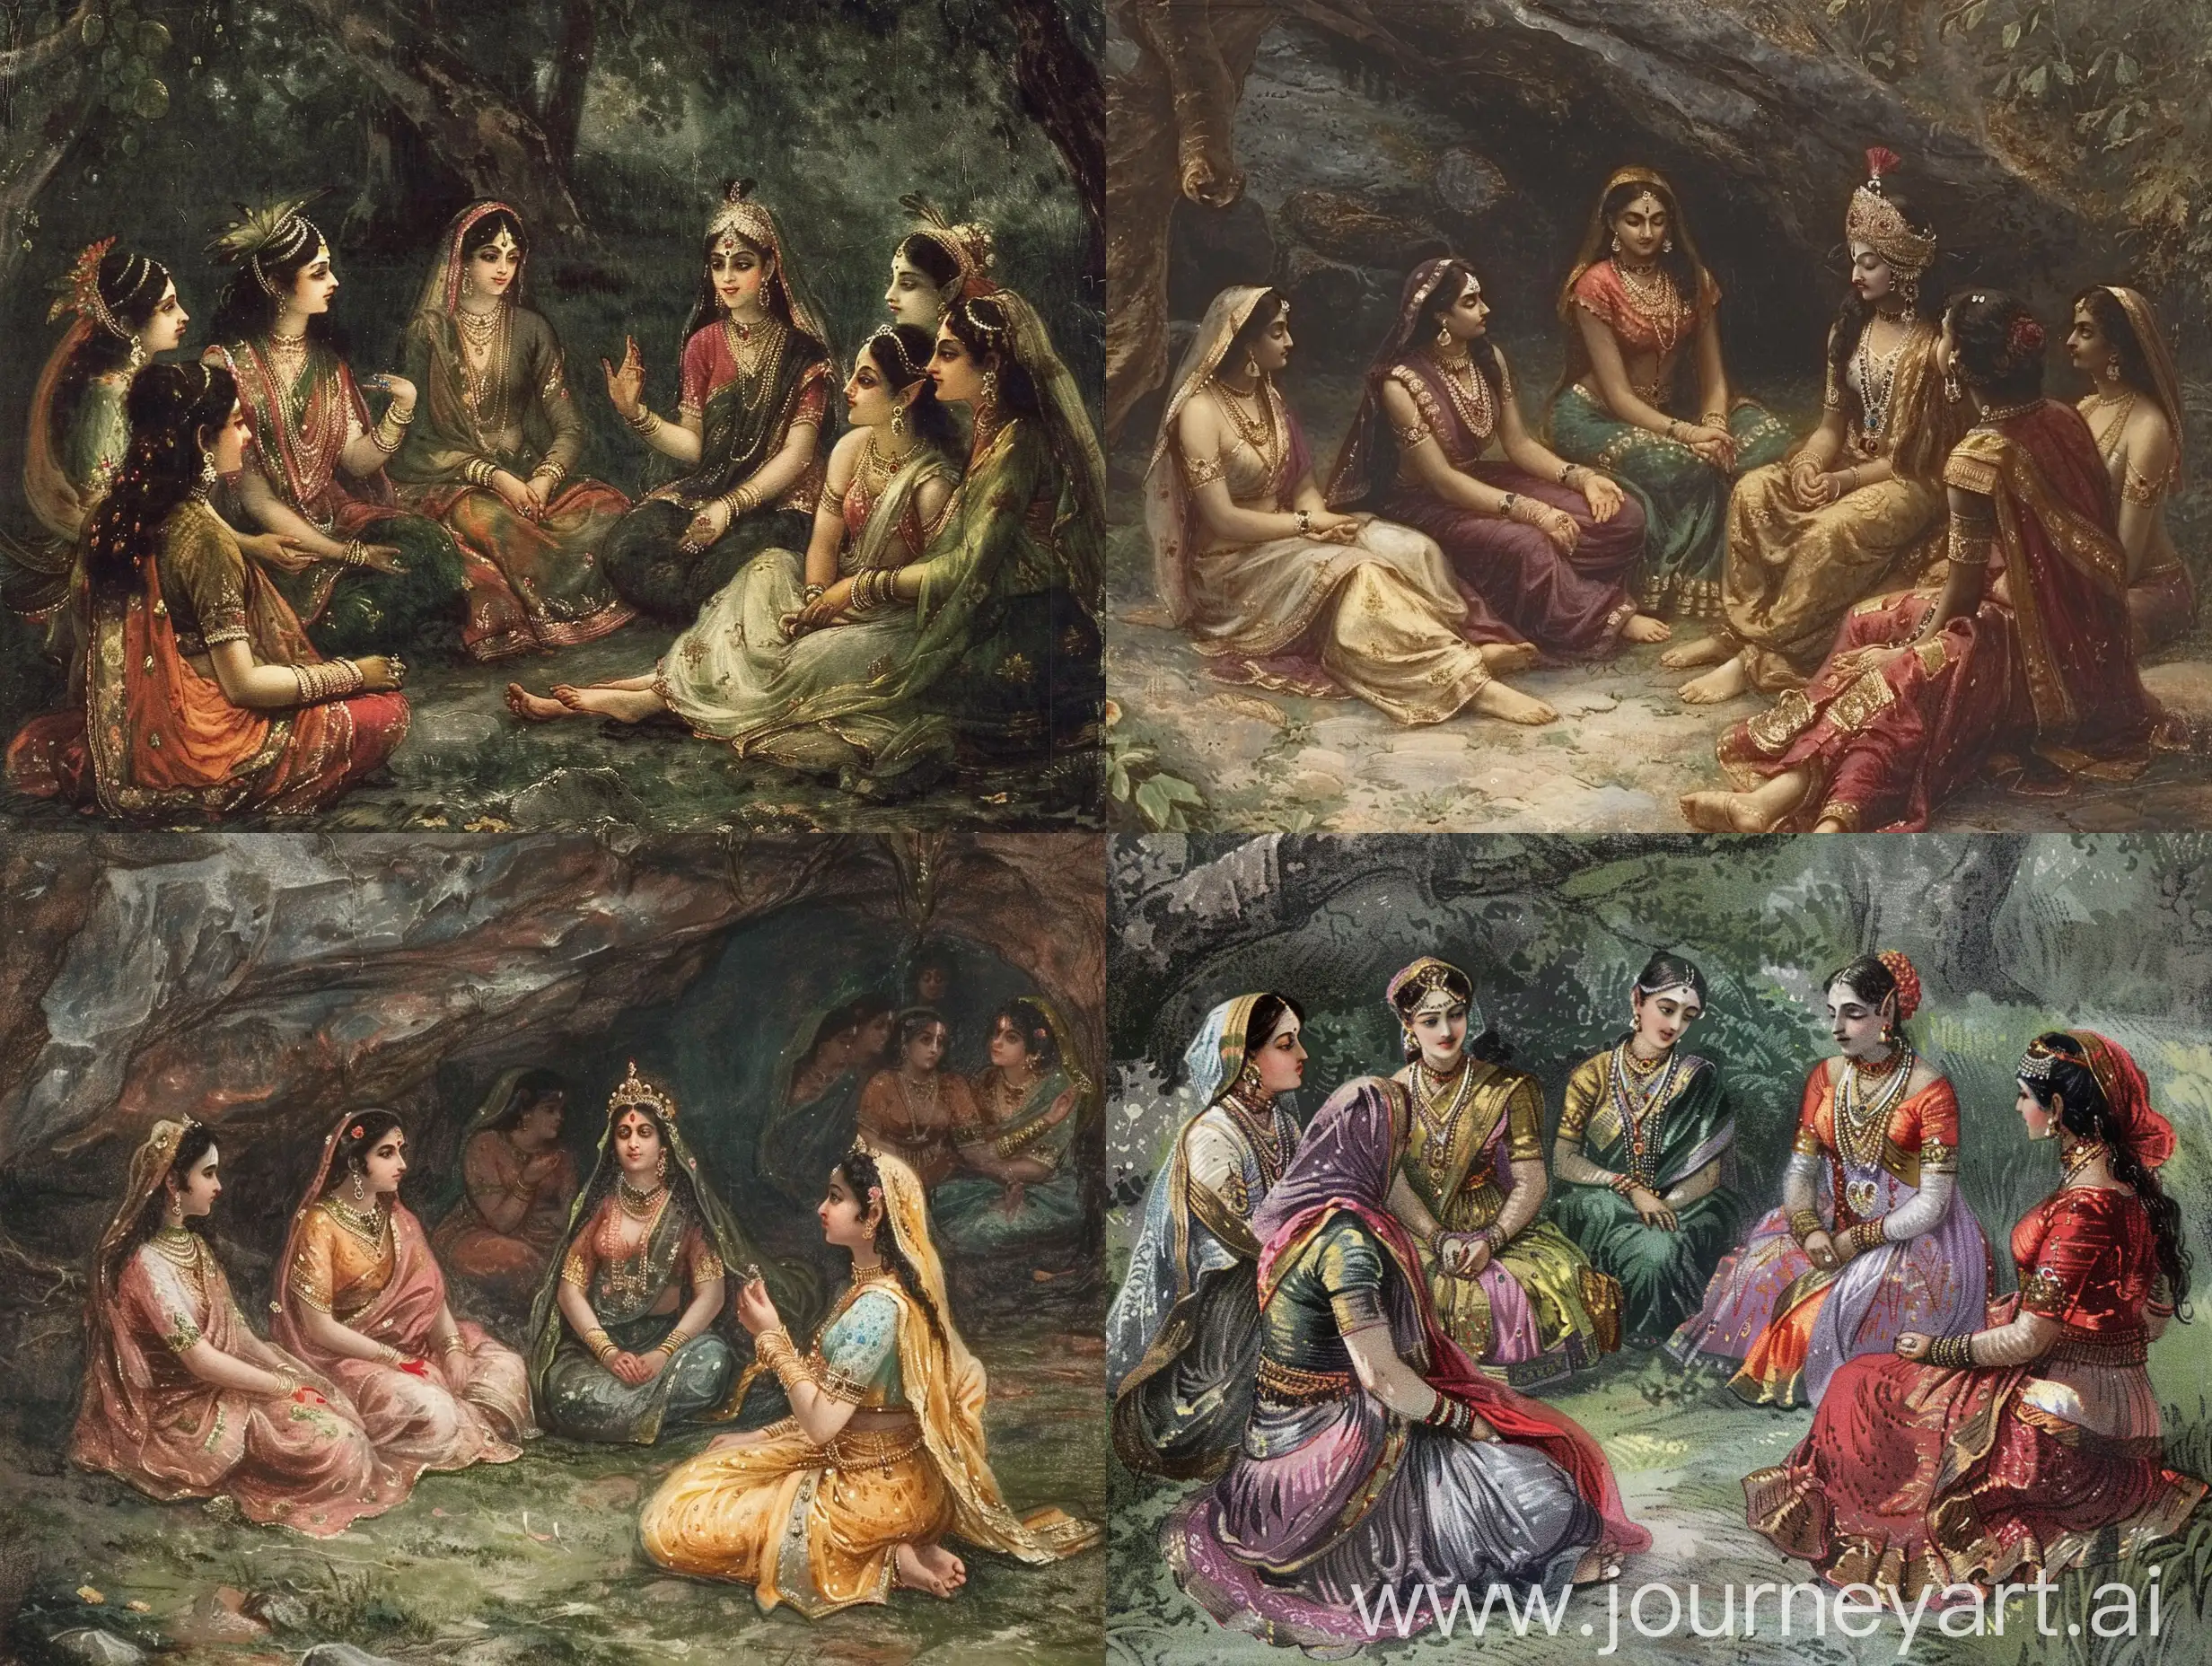 An indian fairy land. Women fairies sitting in a circle.one of them is dressed like a queen.
